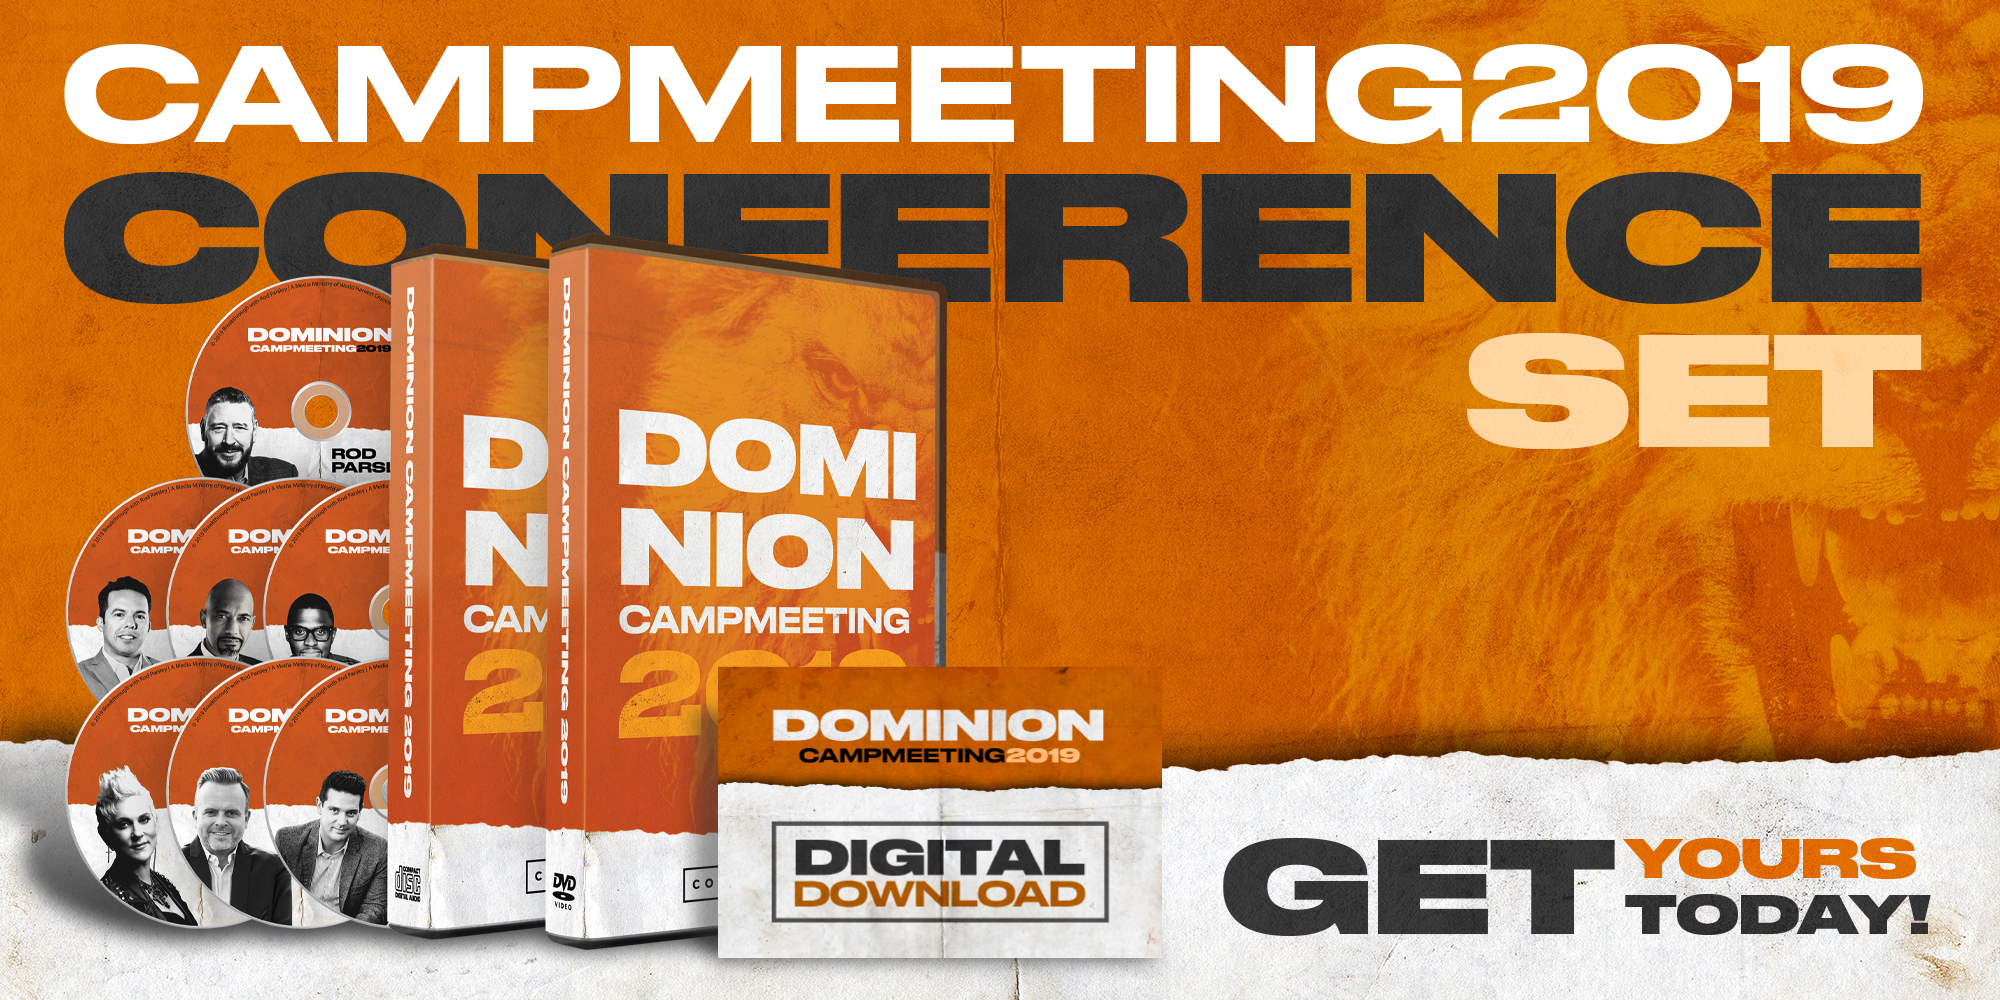 Dominion Camp Meeting 2019 | Conference Sets | Get Yours Today